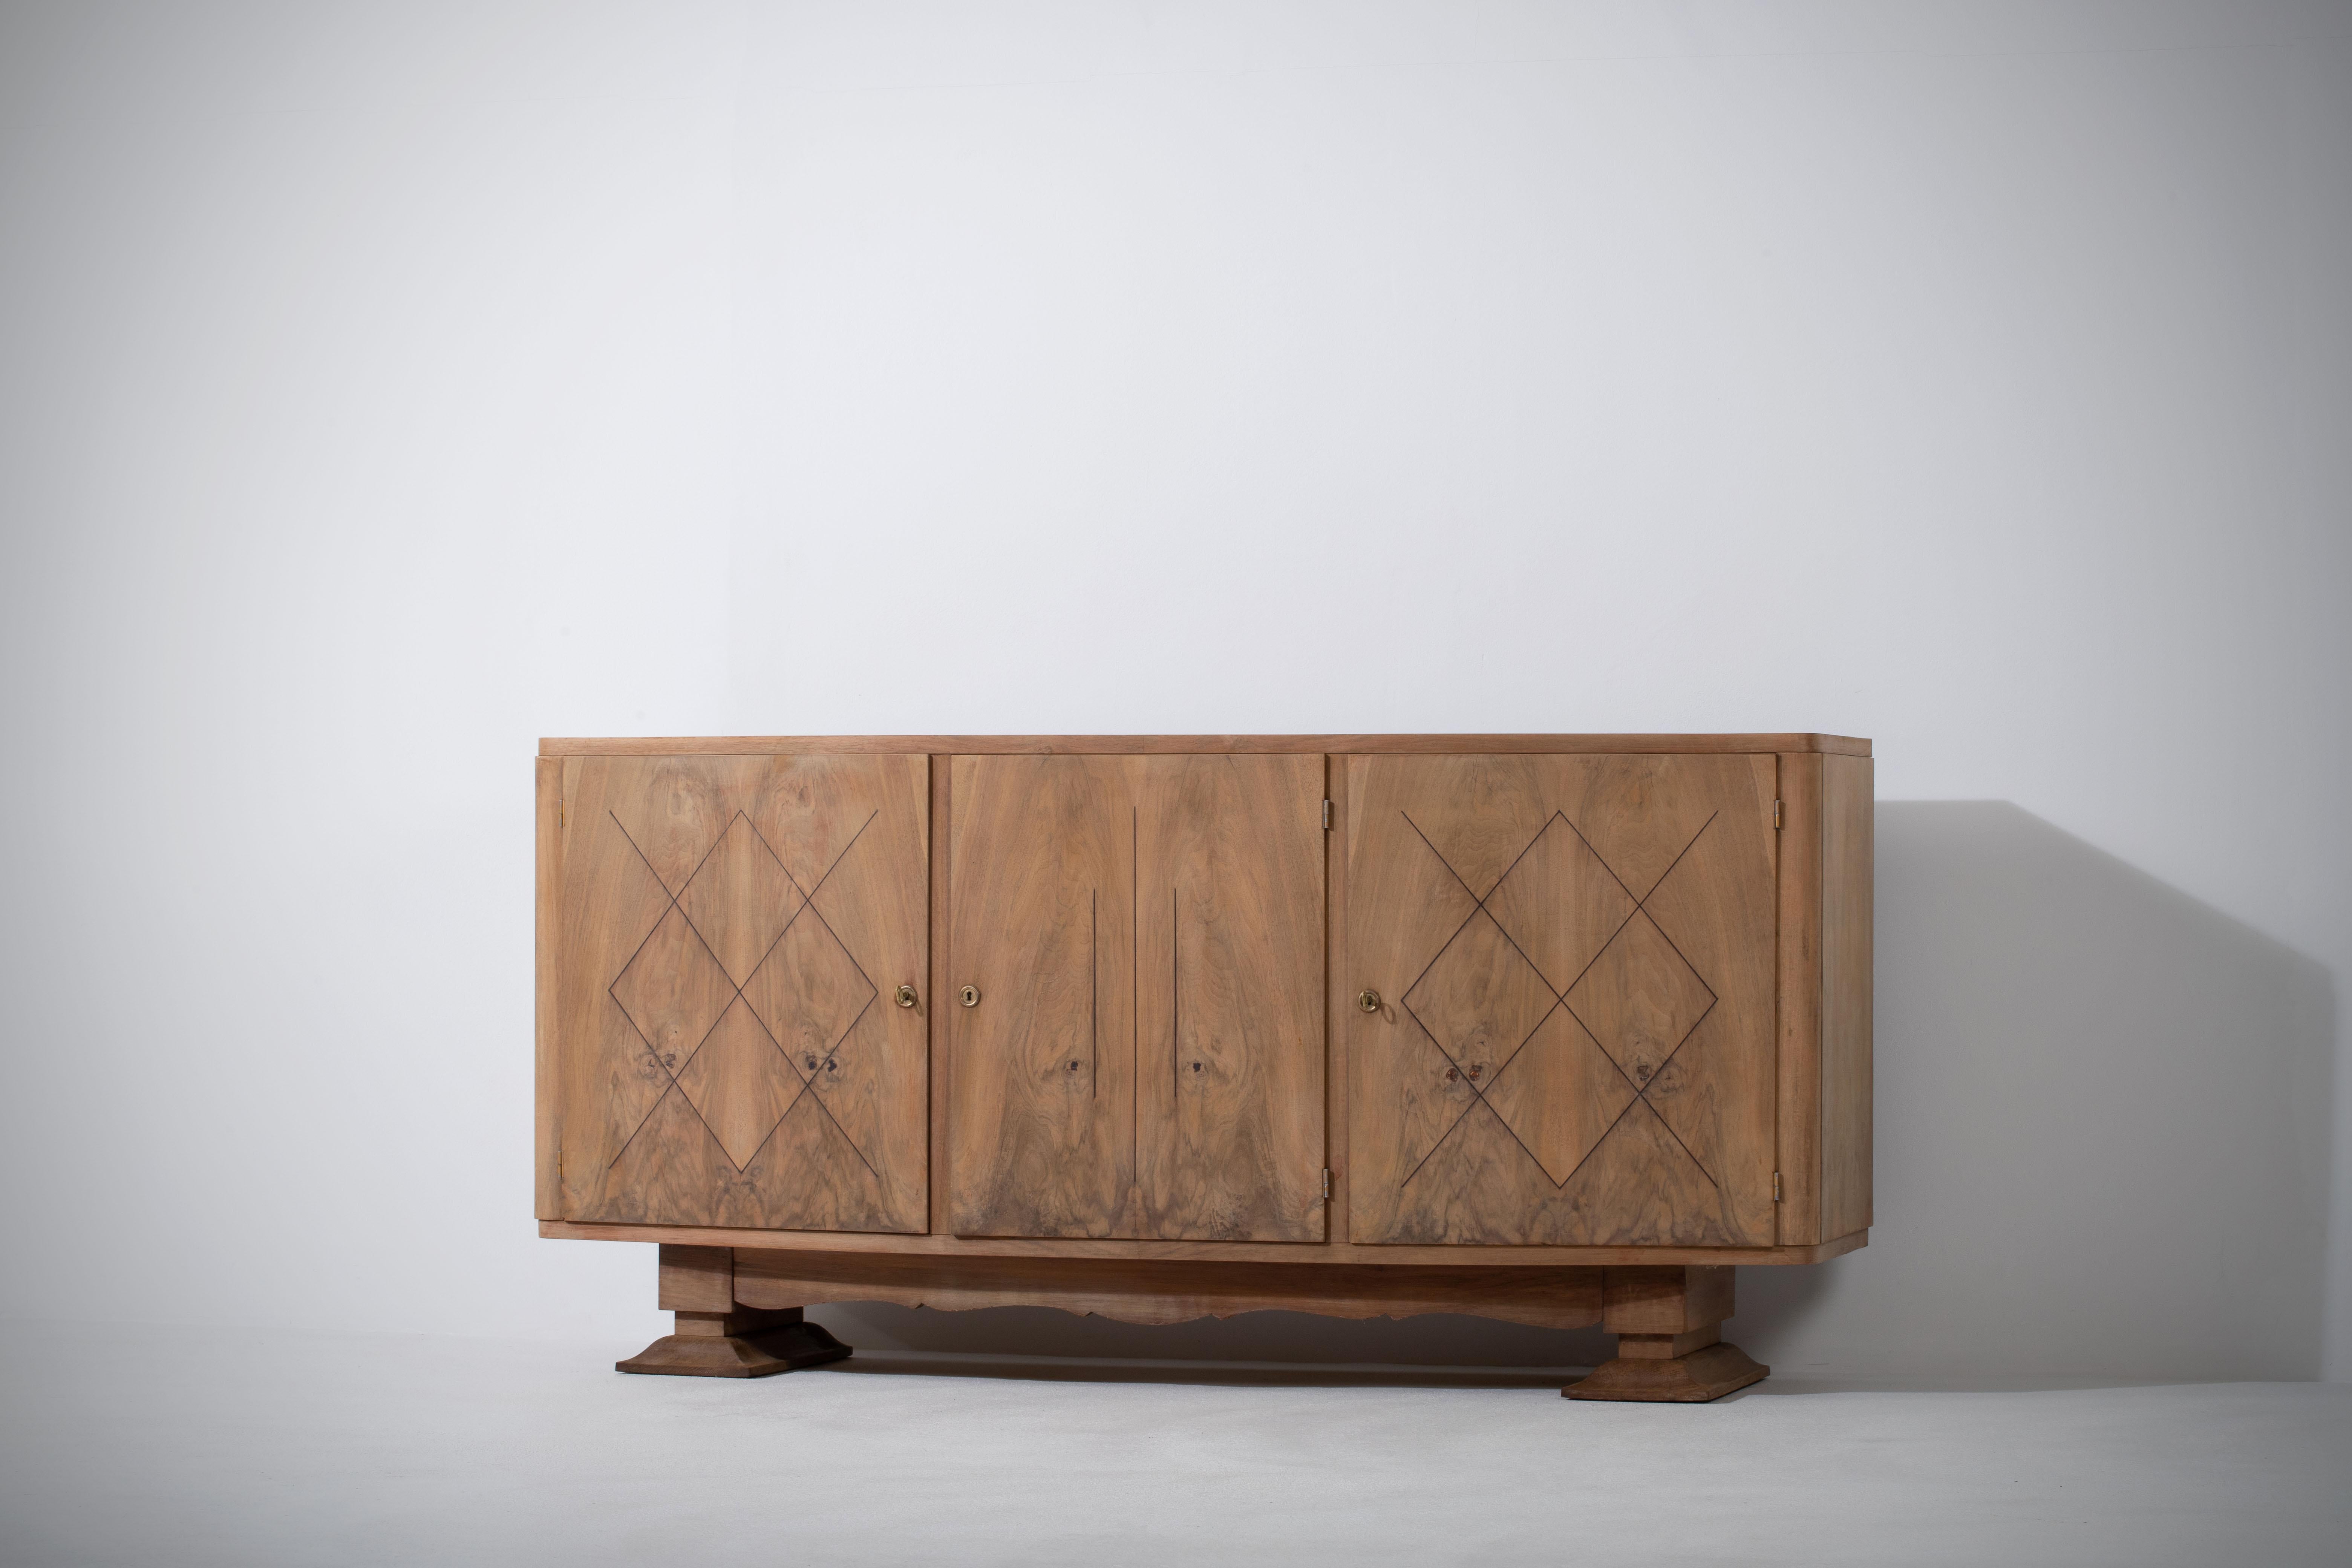 Elegant credenza, walnut, France, 1940s.
Large Art Deco Brutalist sideboard. 
The credenza consists of three storage facilities covered with rich wood grain.
Good condition.